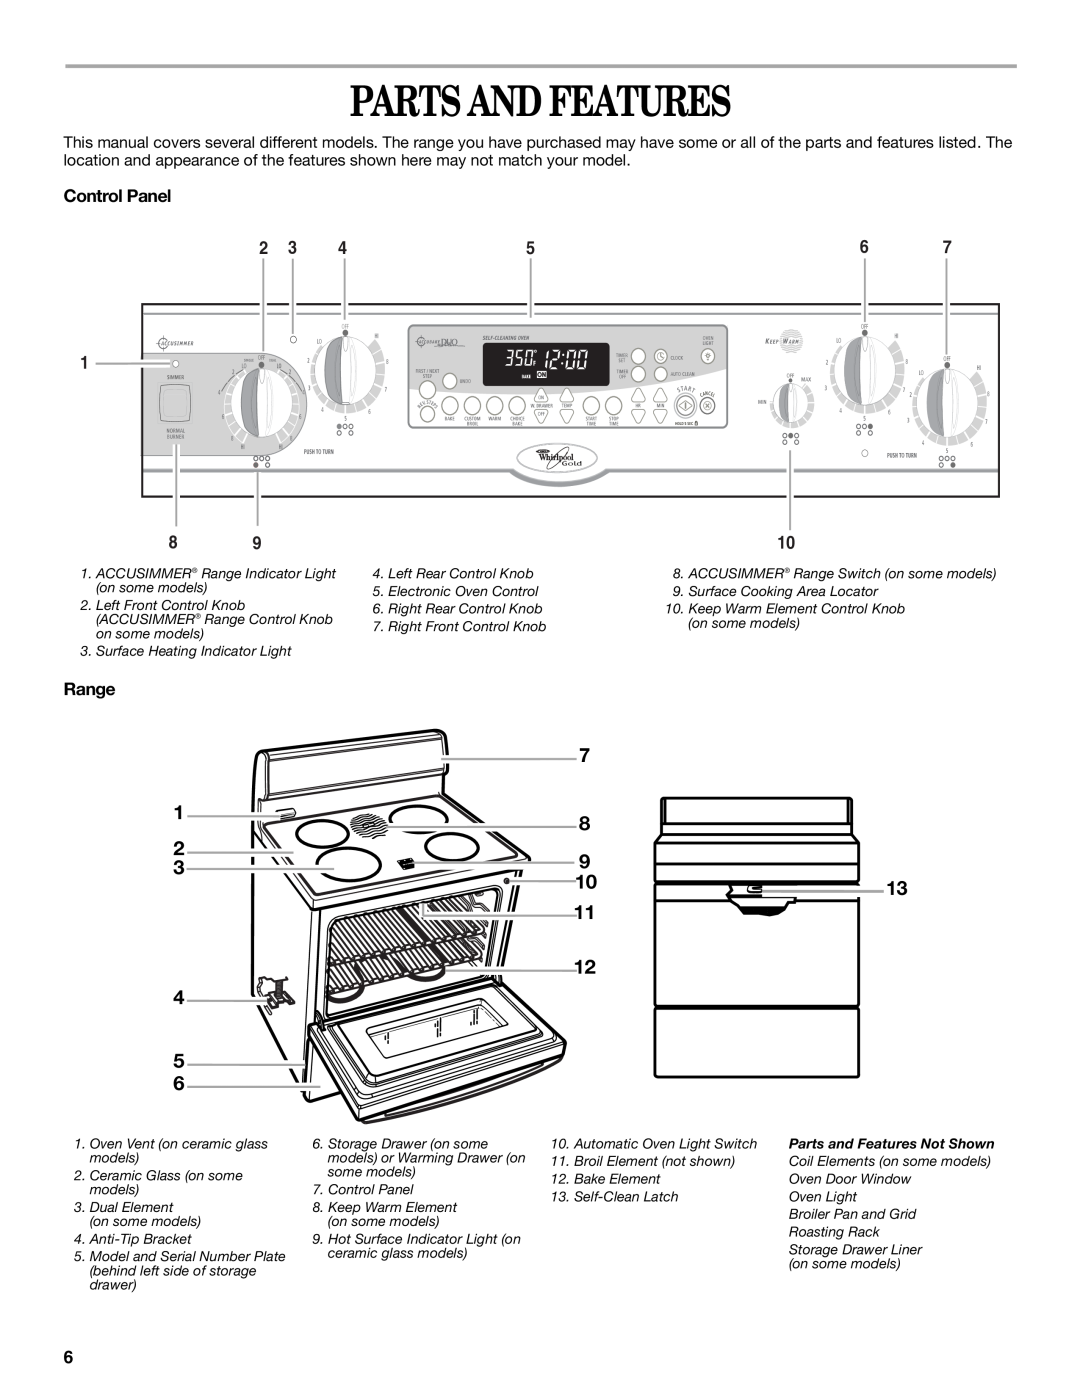 Whirlpool 9754384 manual Parts And Features, Control Panel, Range 